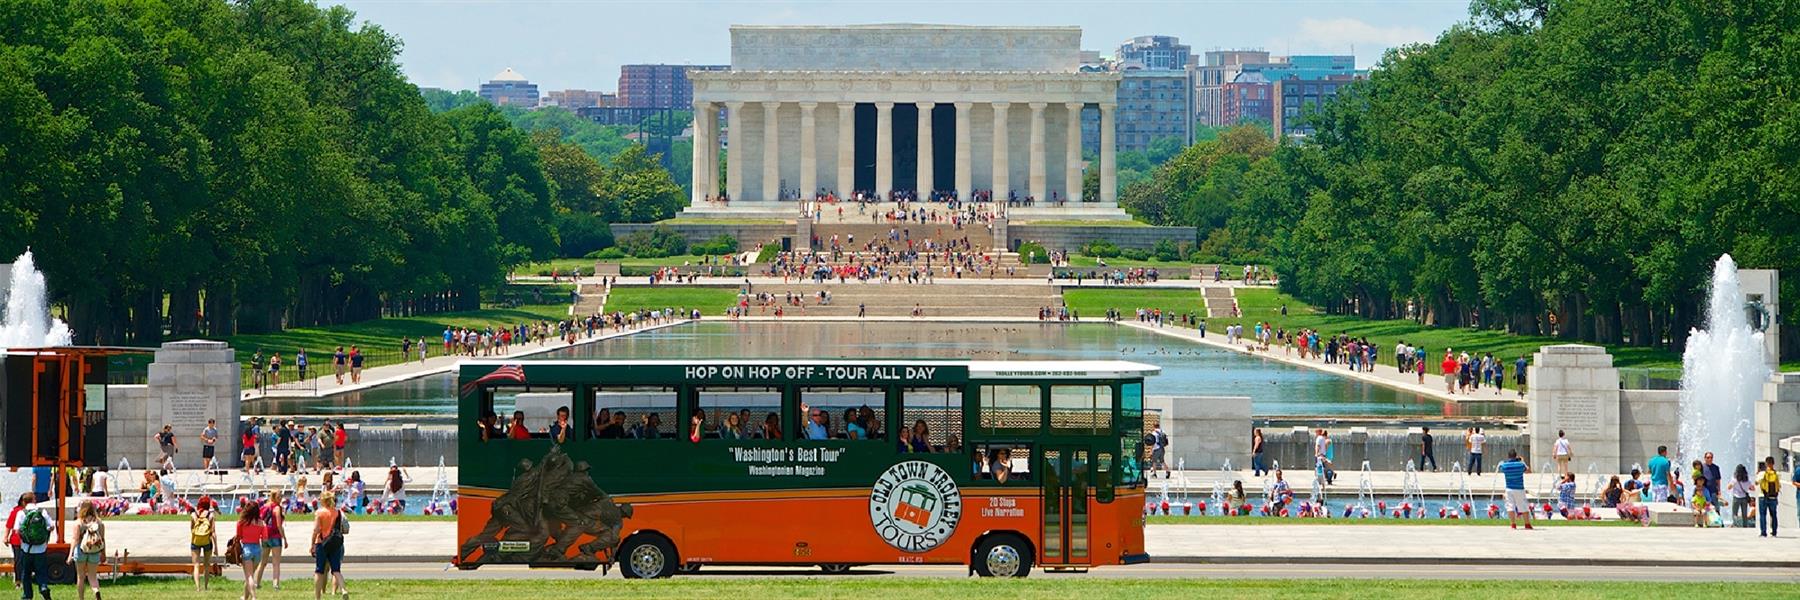 Old Town Trolley City Tour of DC in Washington, District of Columbia